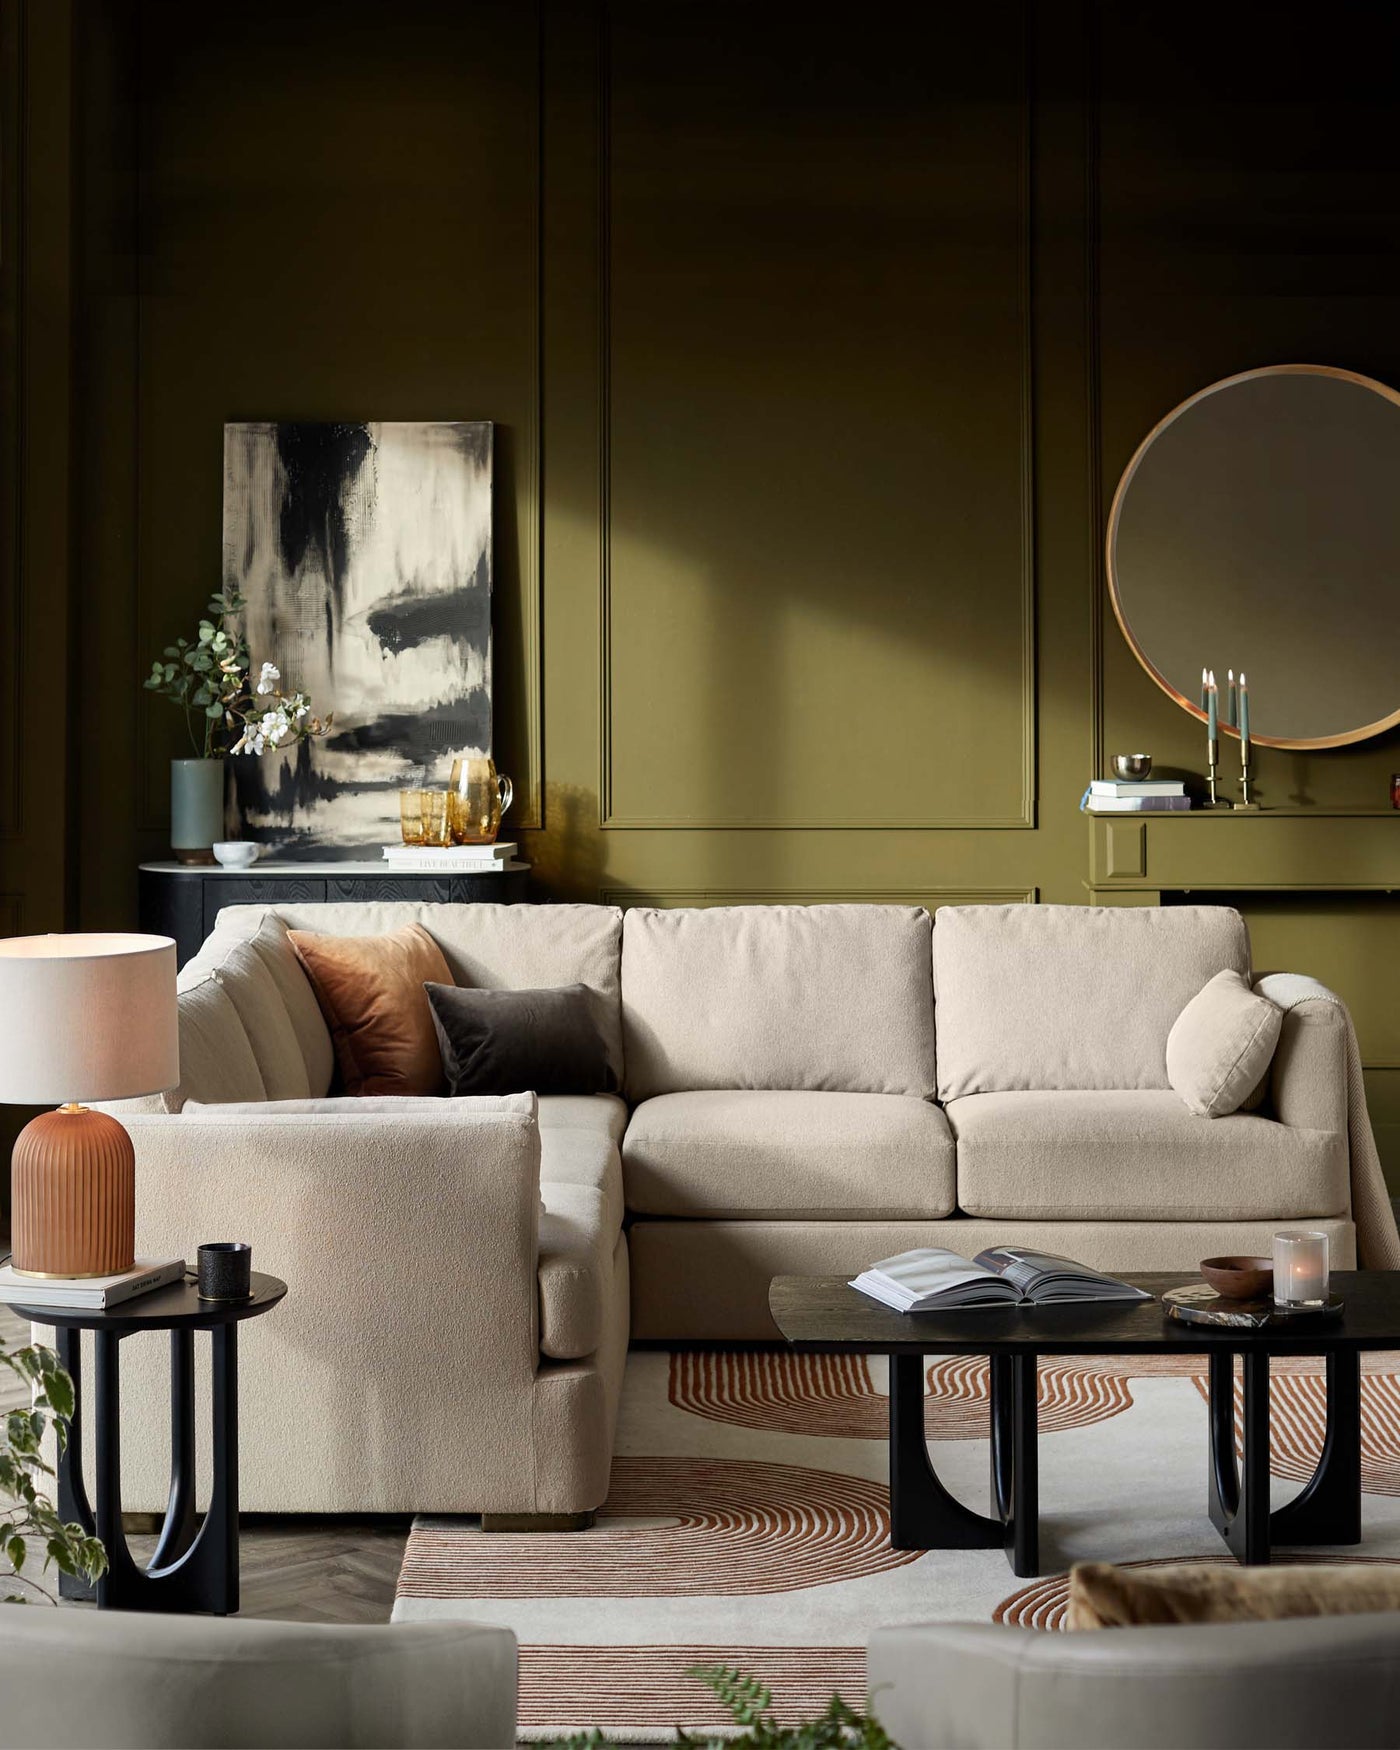 Elegant living room furniture set including a neutral-toned modular sectional sofa with plush cushions, a pair of modern round black side tables, and an abstract-patterned area rug. Accessories include a ceramic table lamp, decorative pillows, and a simple artwork above a sleek console table accompanied by a round mirror.